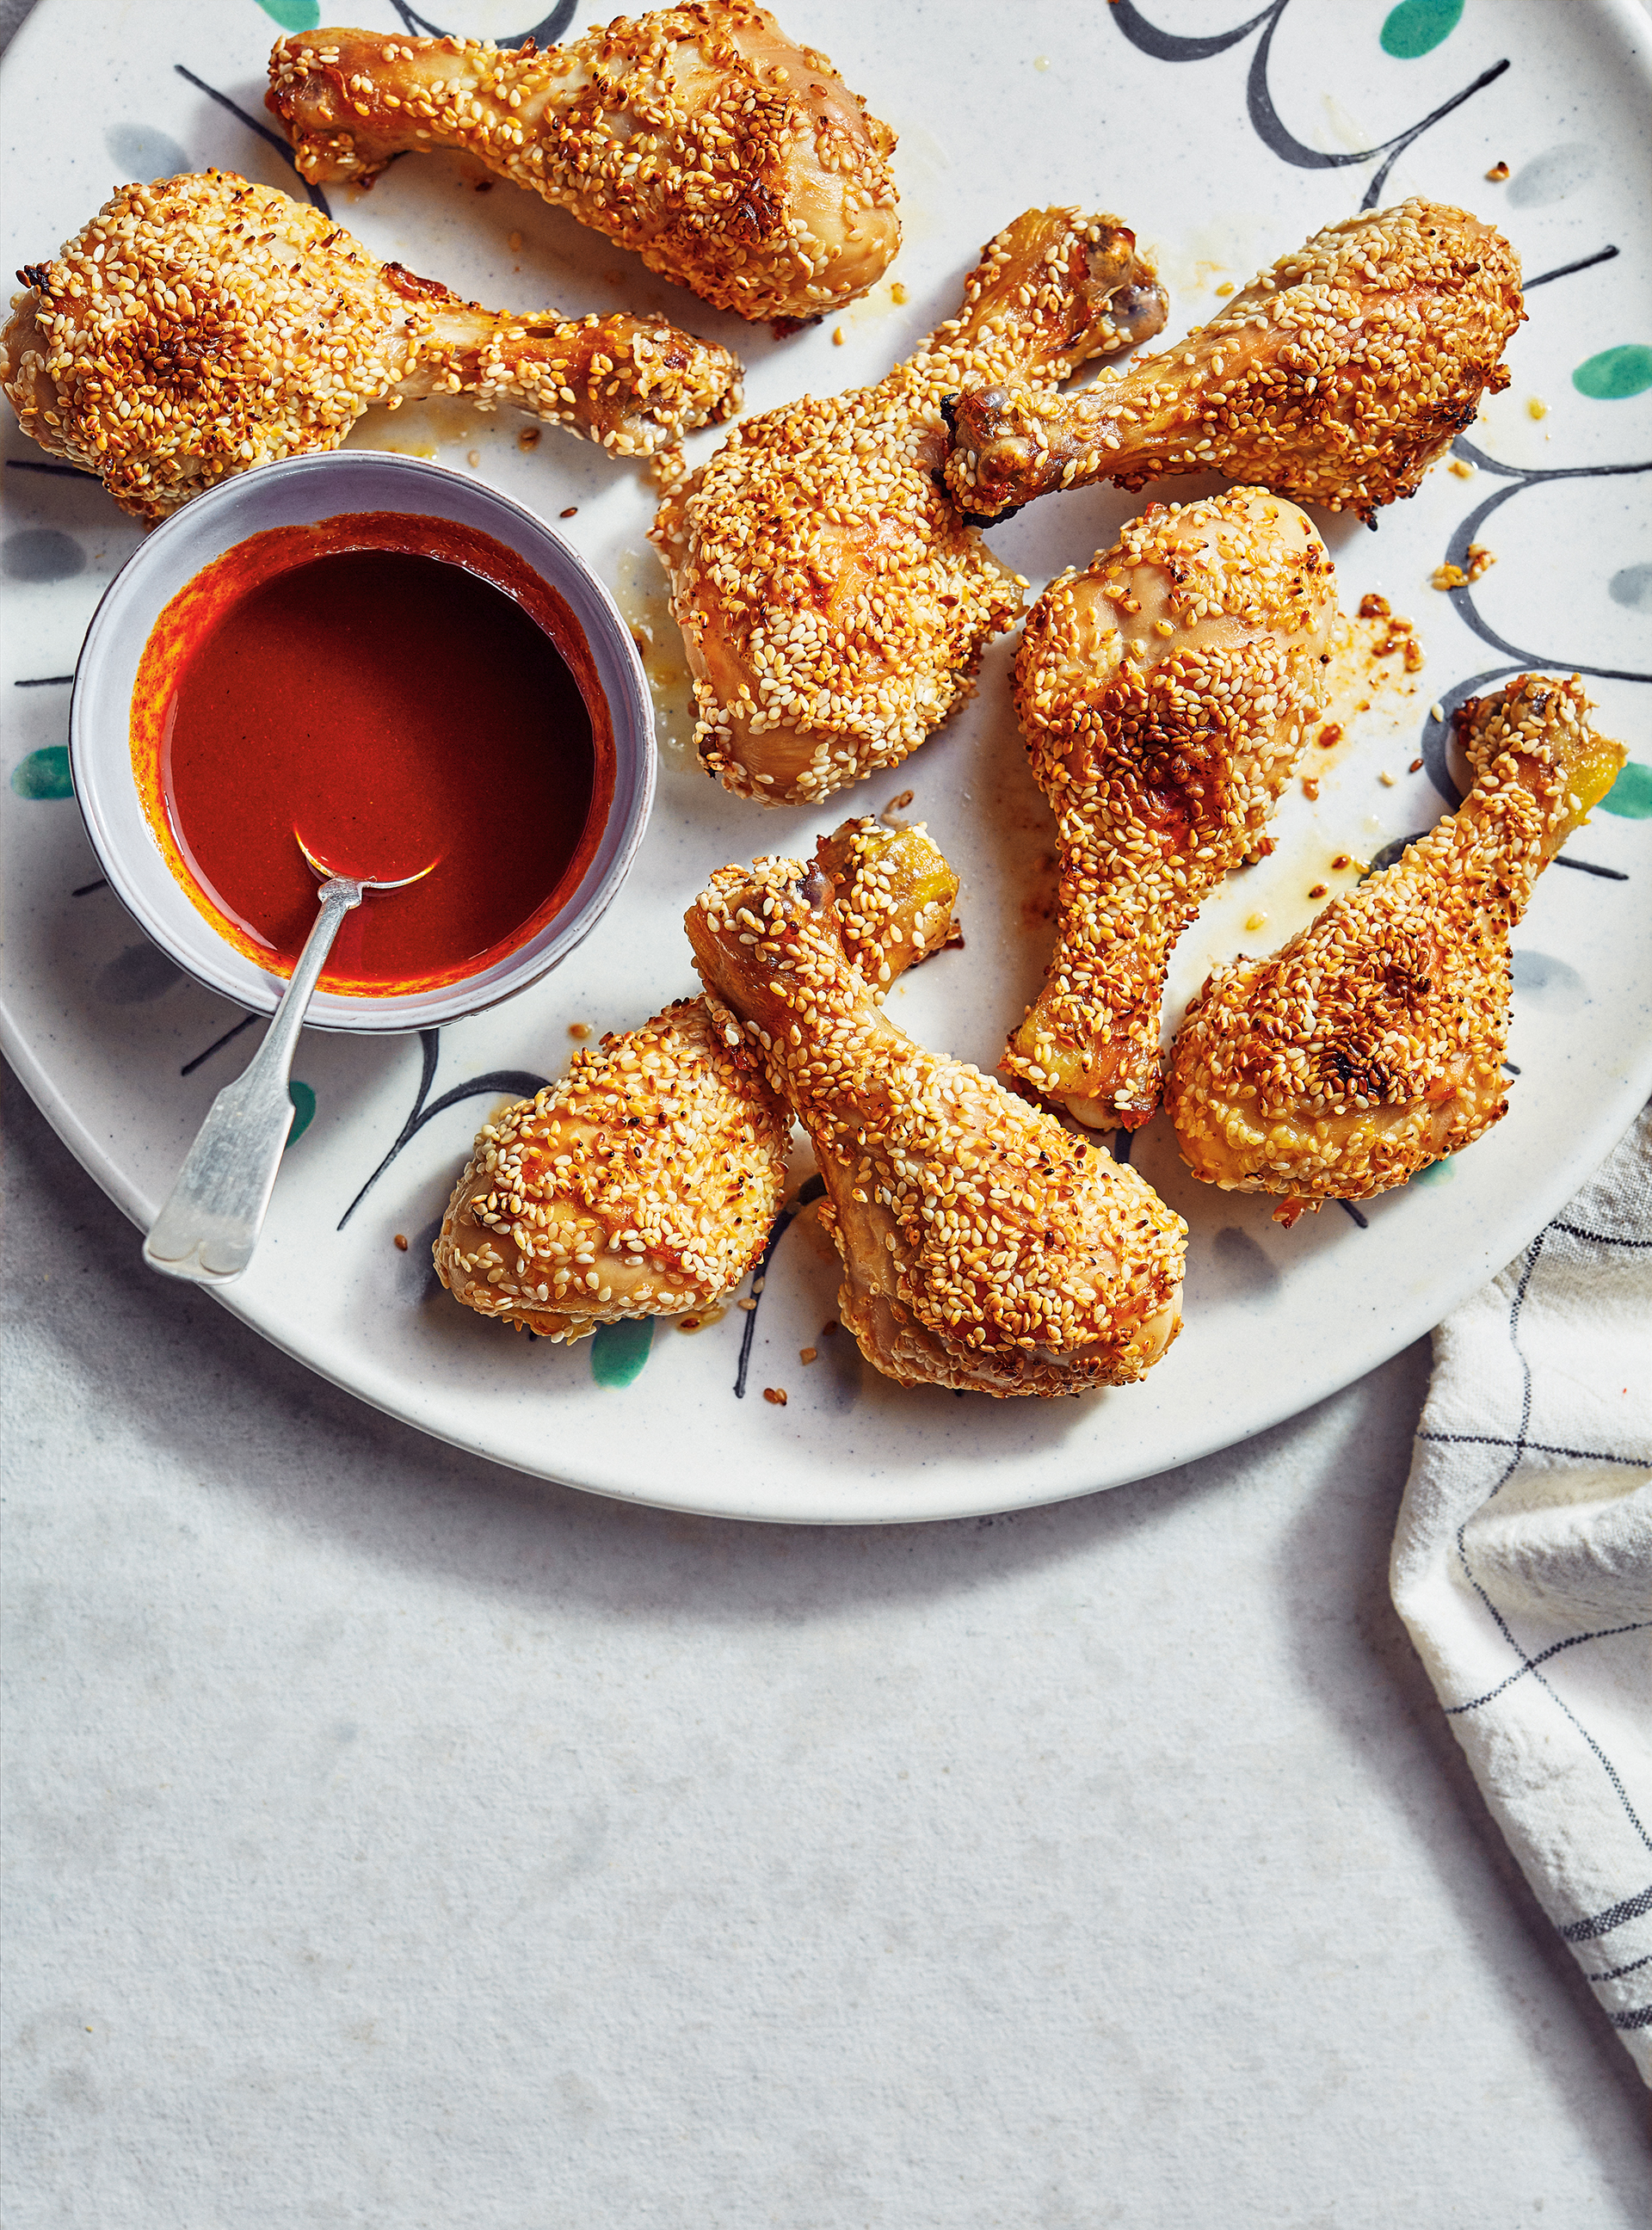 Sesame-Crusted Chicken Drumsticks with Spicy Lemon Sauce